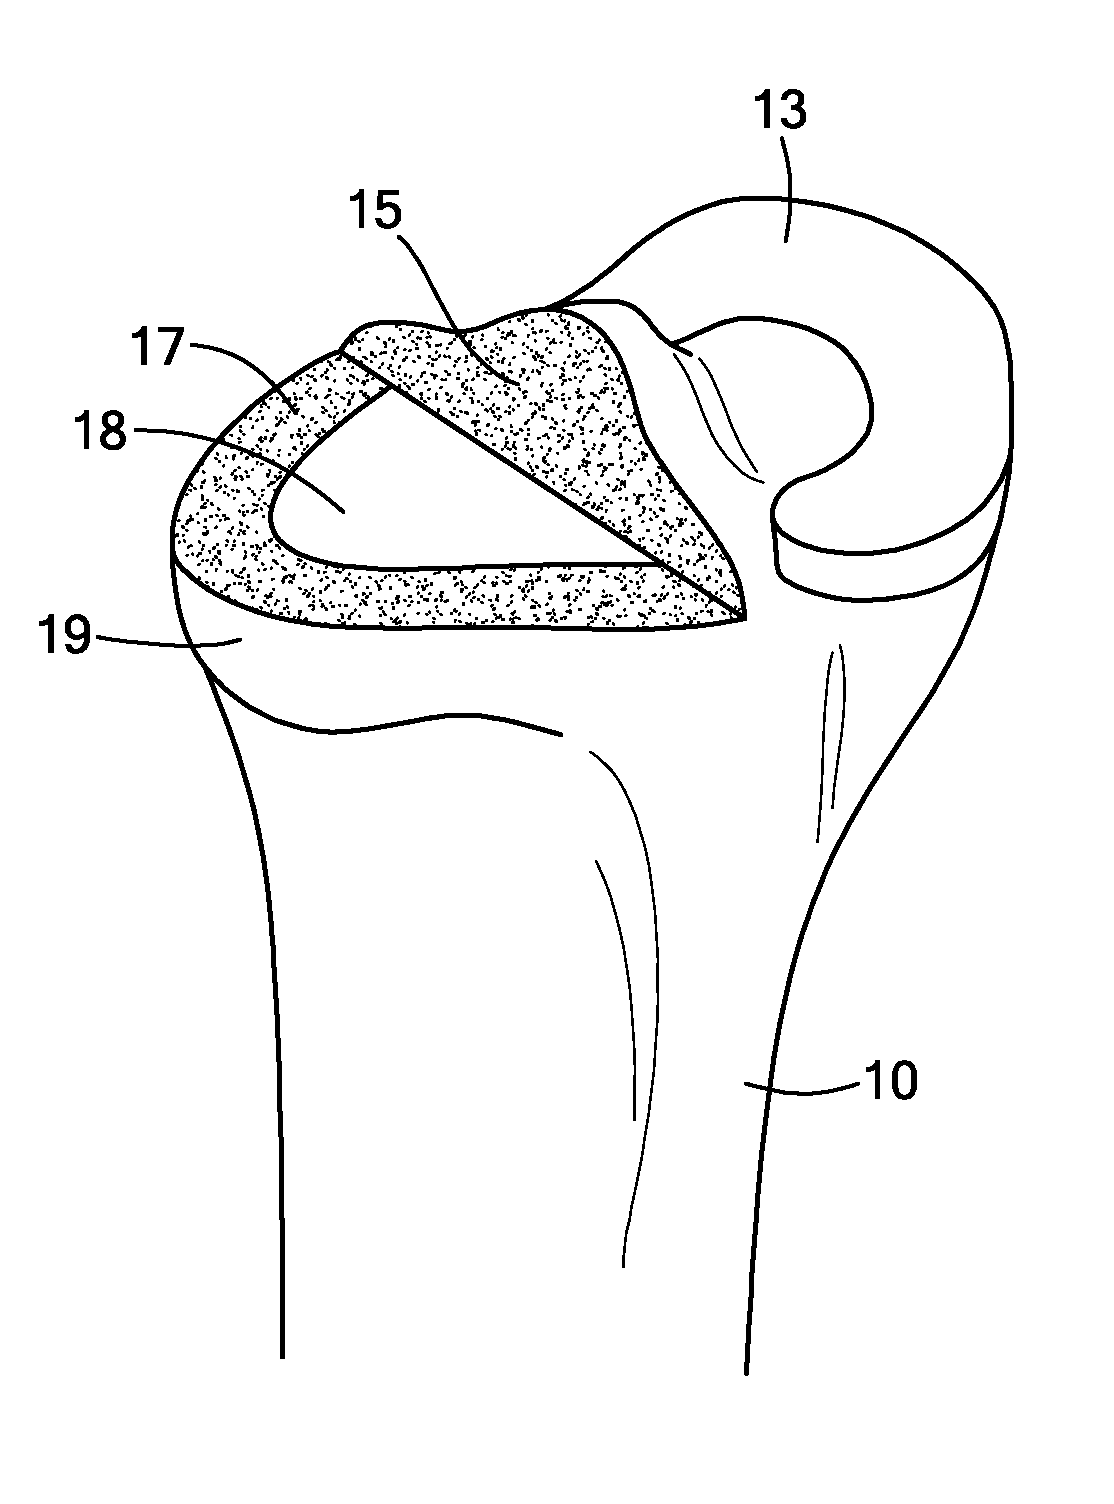 Edge-Matched Articular Implant